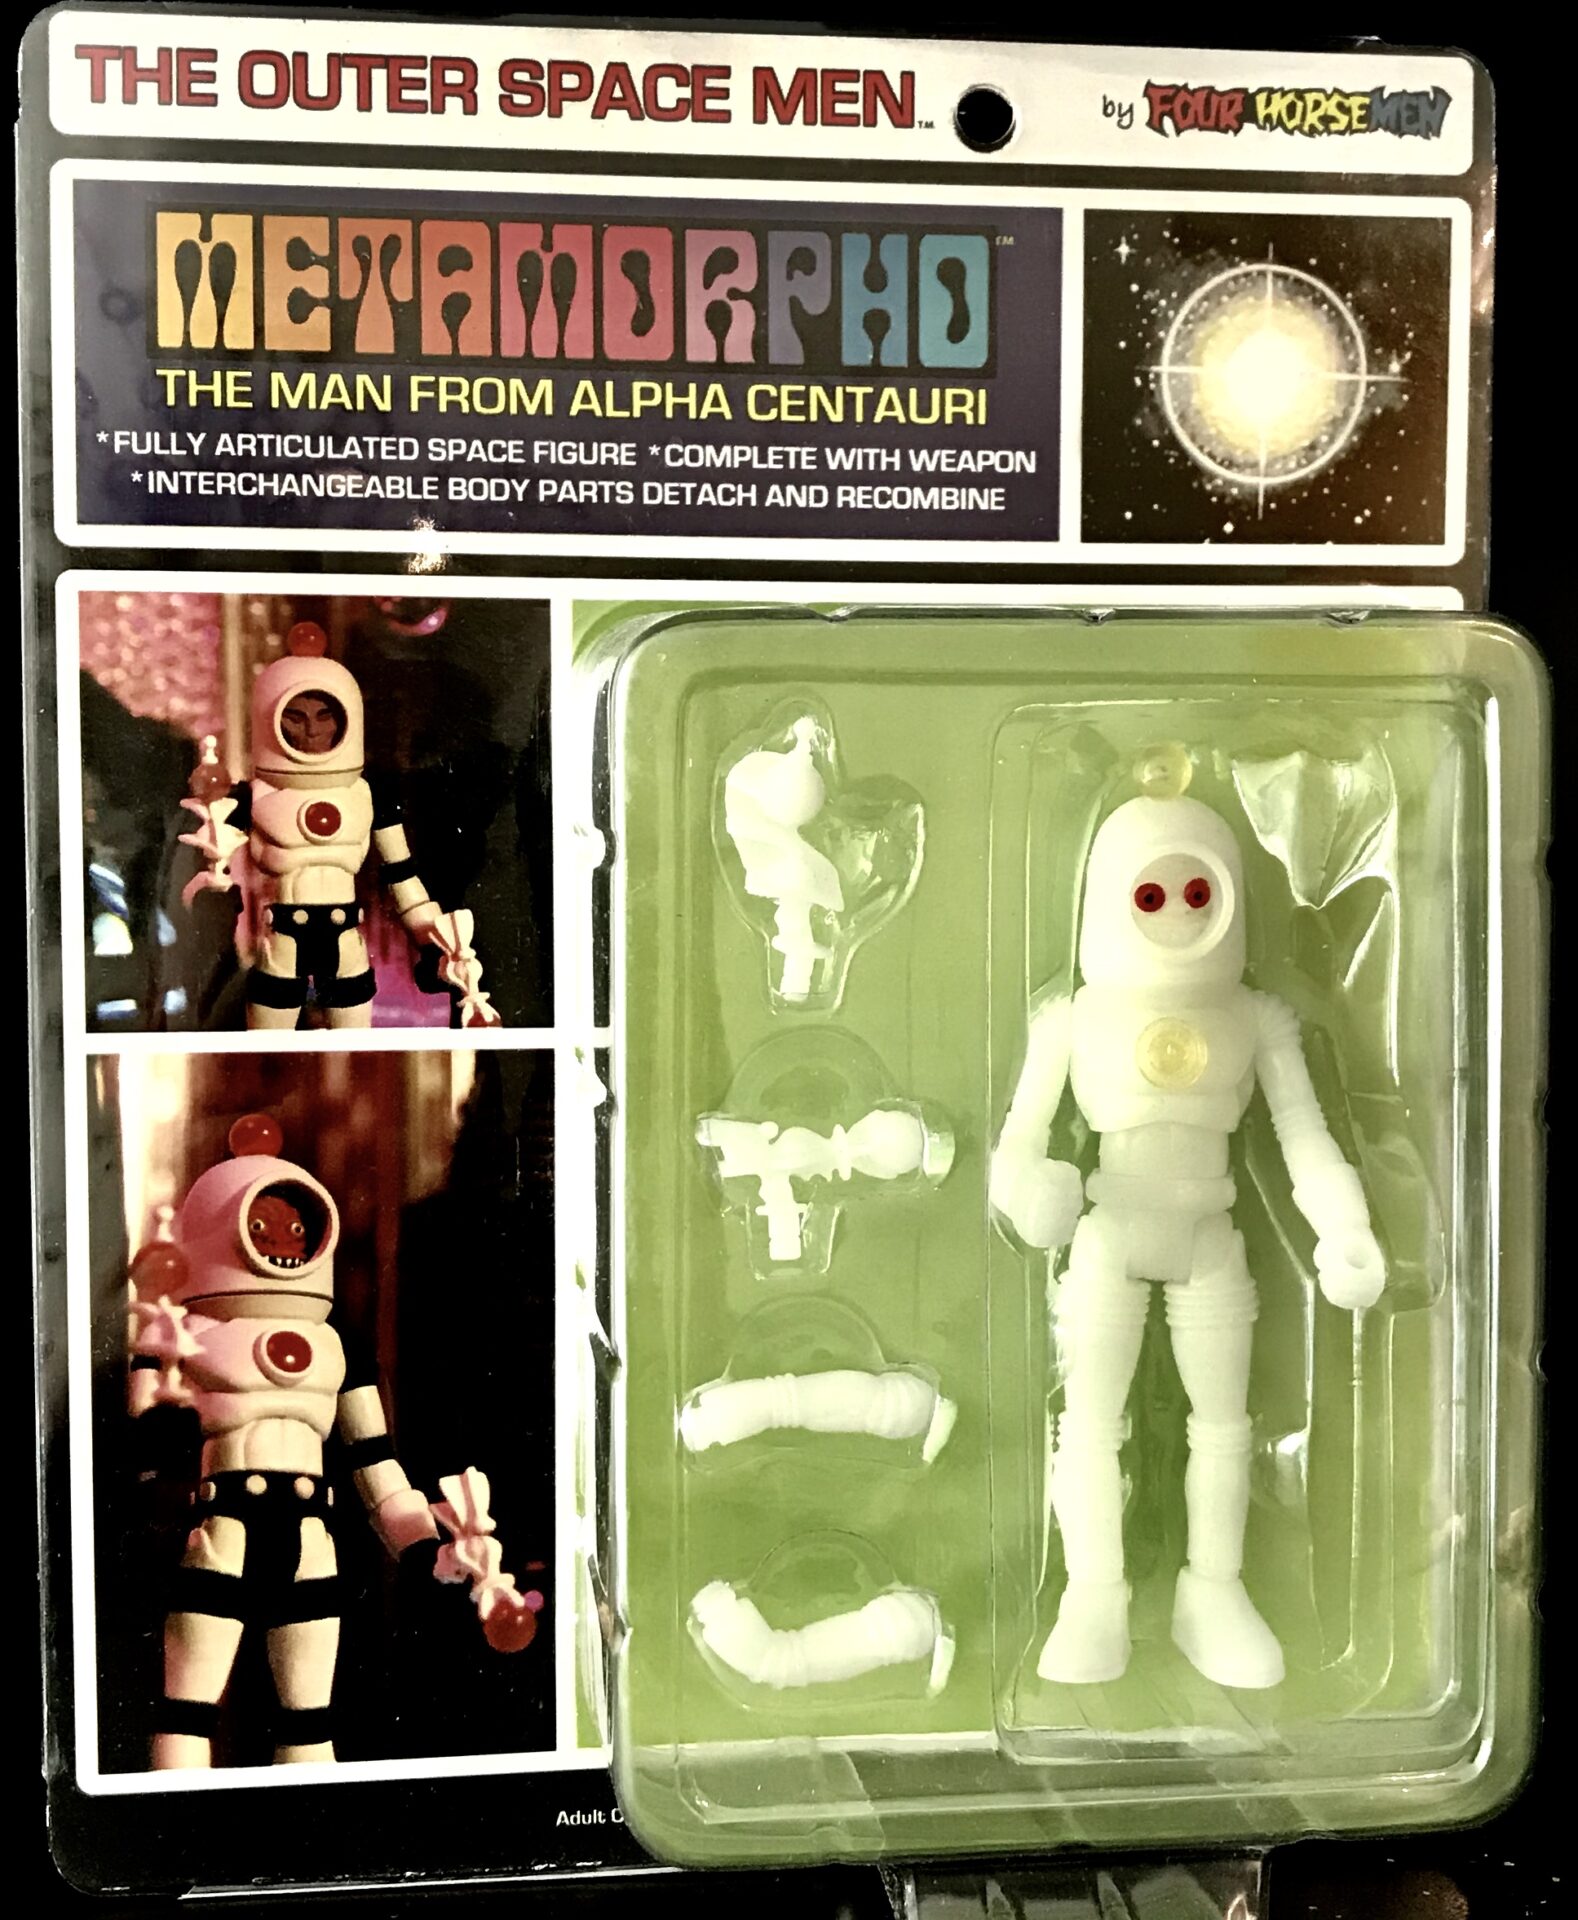 The METAMORPHO 2010 GLOW IN THE DARK LIMITED EDITION SDCC EXCLUSIVE CARDED HYBRID mexican hd action figure.